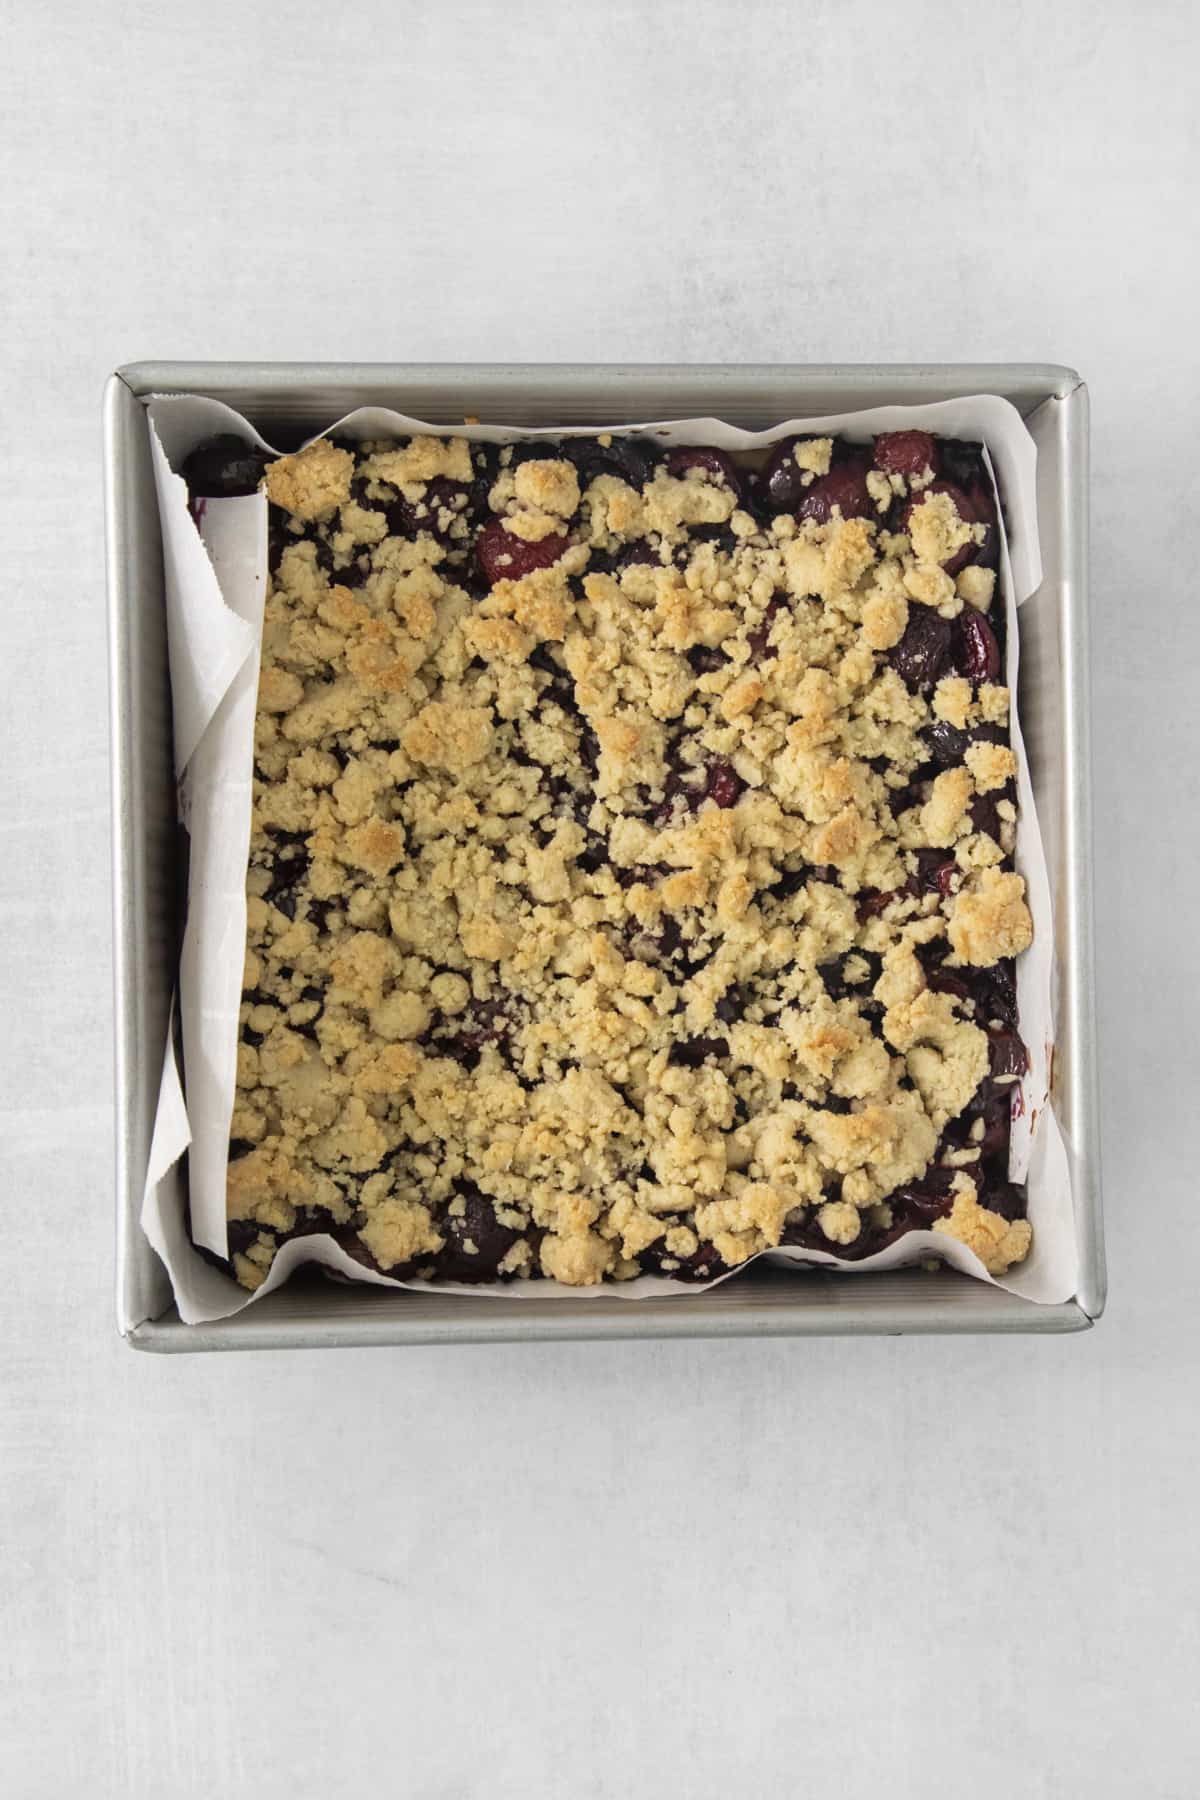 assembled and baked cherry pie bars in a baking dish.